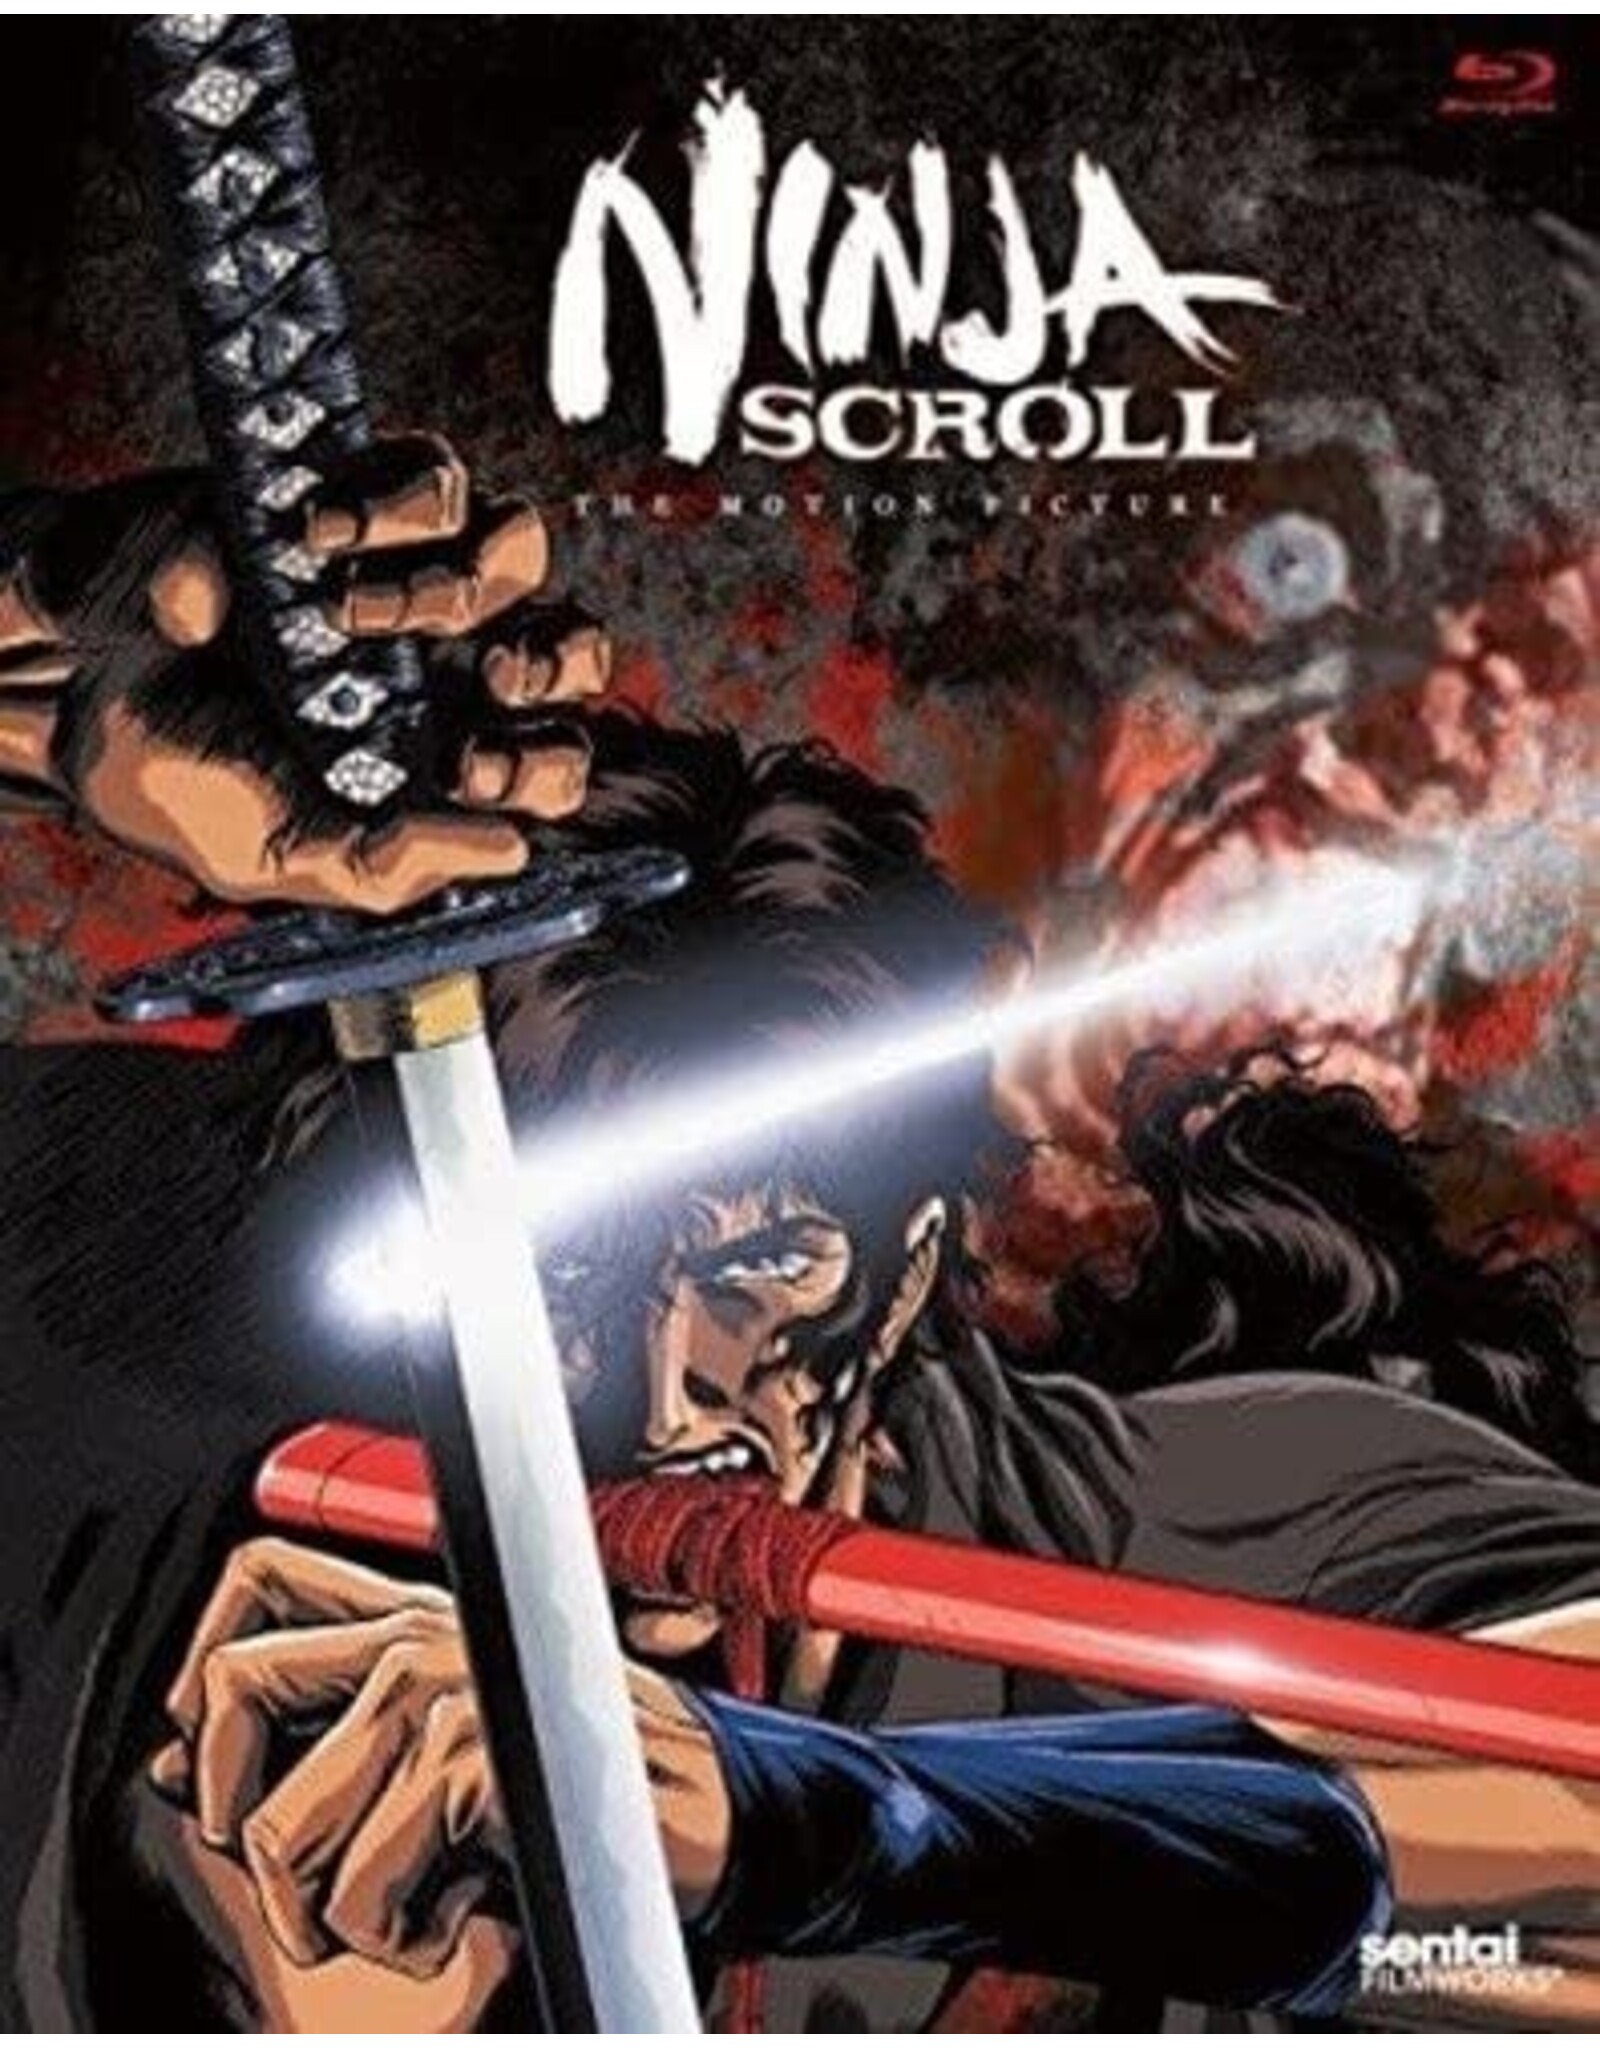 Anime & Animation Ninja Scroll The Motion Picture (Used, w/ Slipcover)